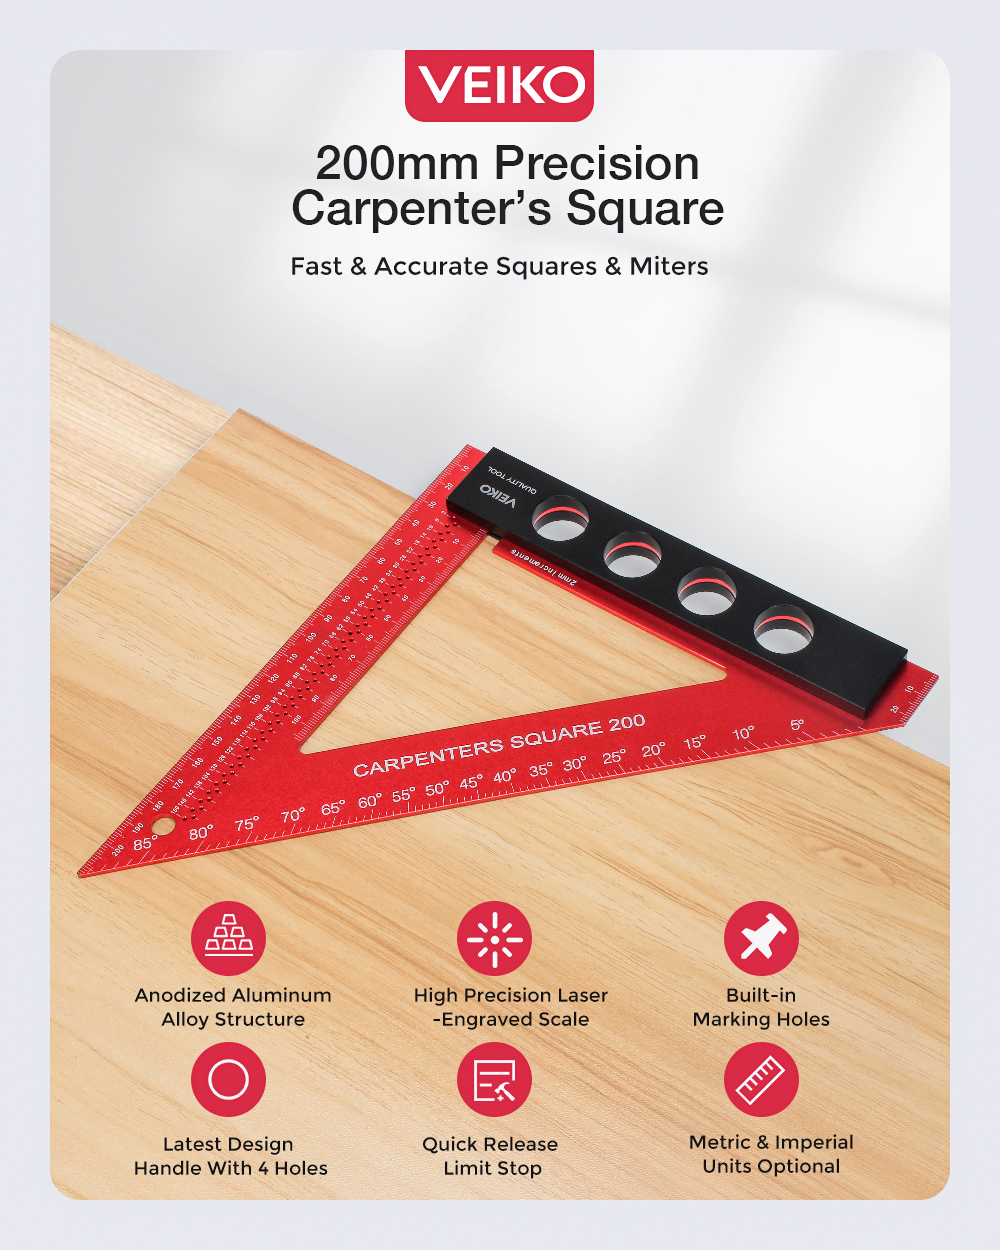 VEIKO-200mm-Aluminum-Alloy-Carpenter-Square-Triangle-Ruler-Woodworking-Precision-Hole-Positioning-Sq-1907931-1